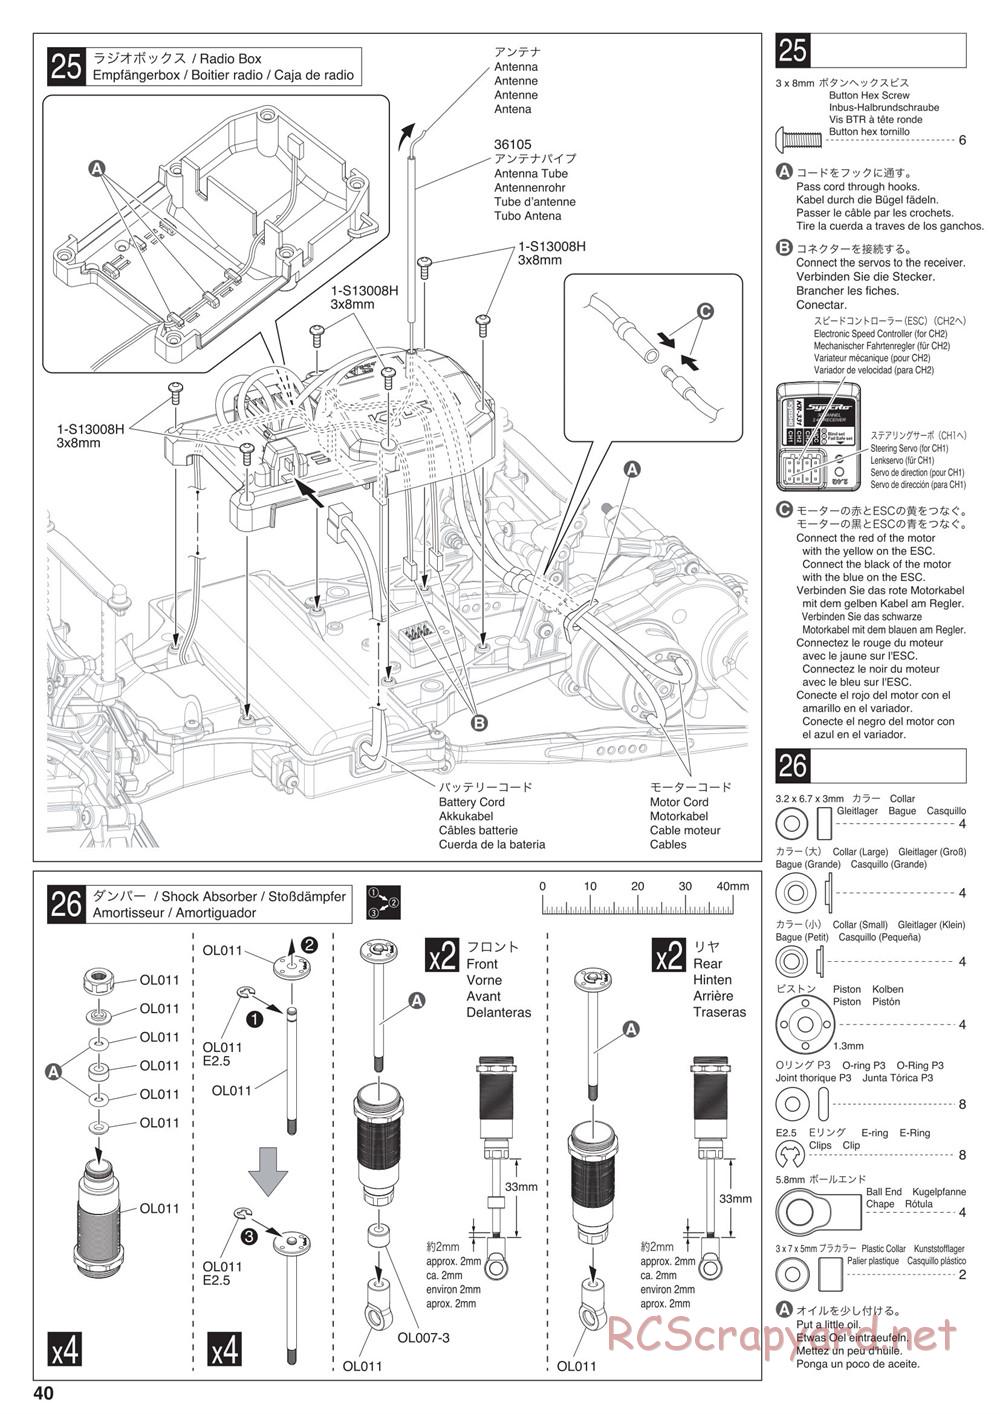 Kyosho - Outlaw Rampage - Manual - Page 40